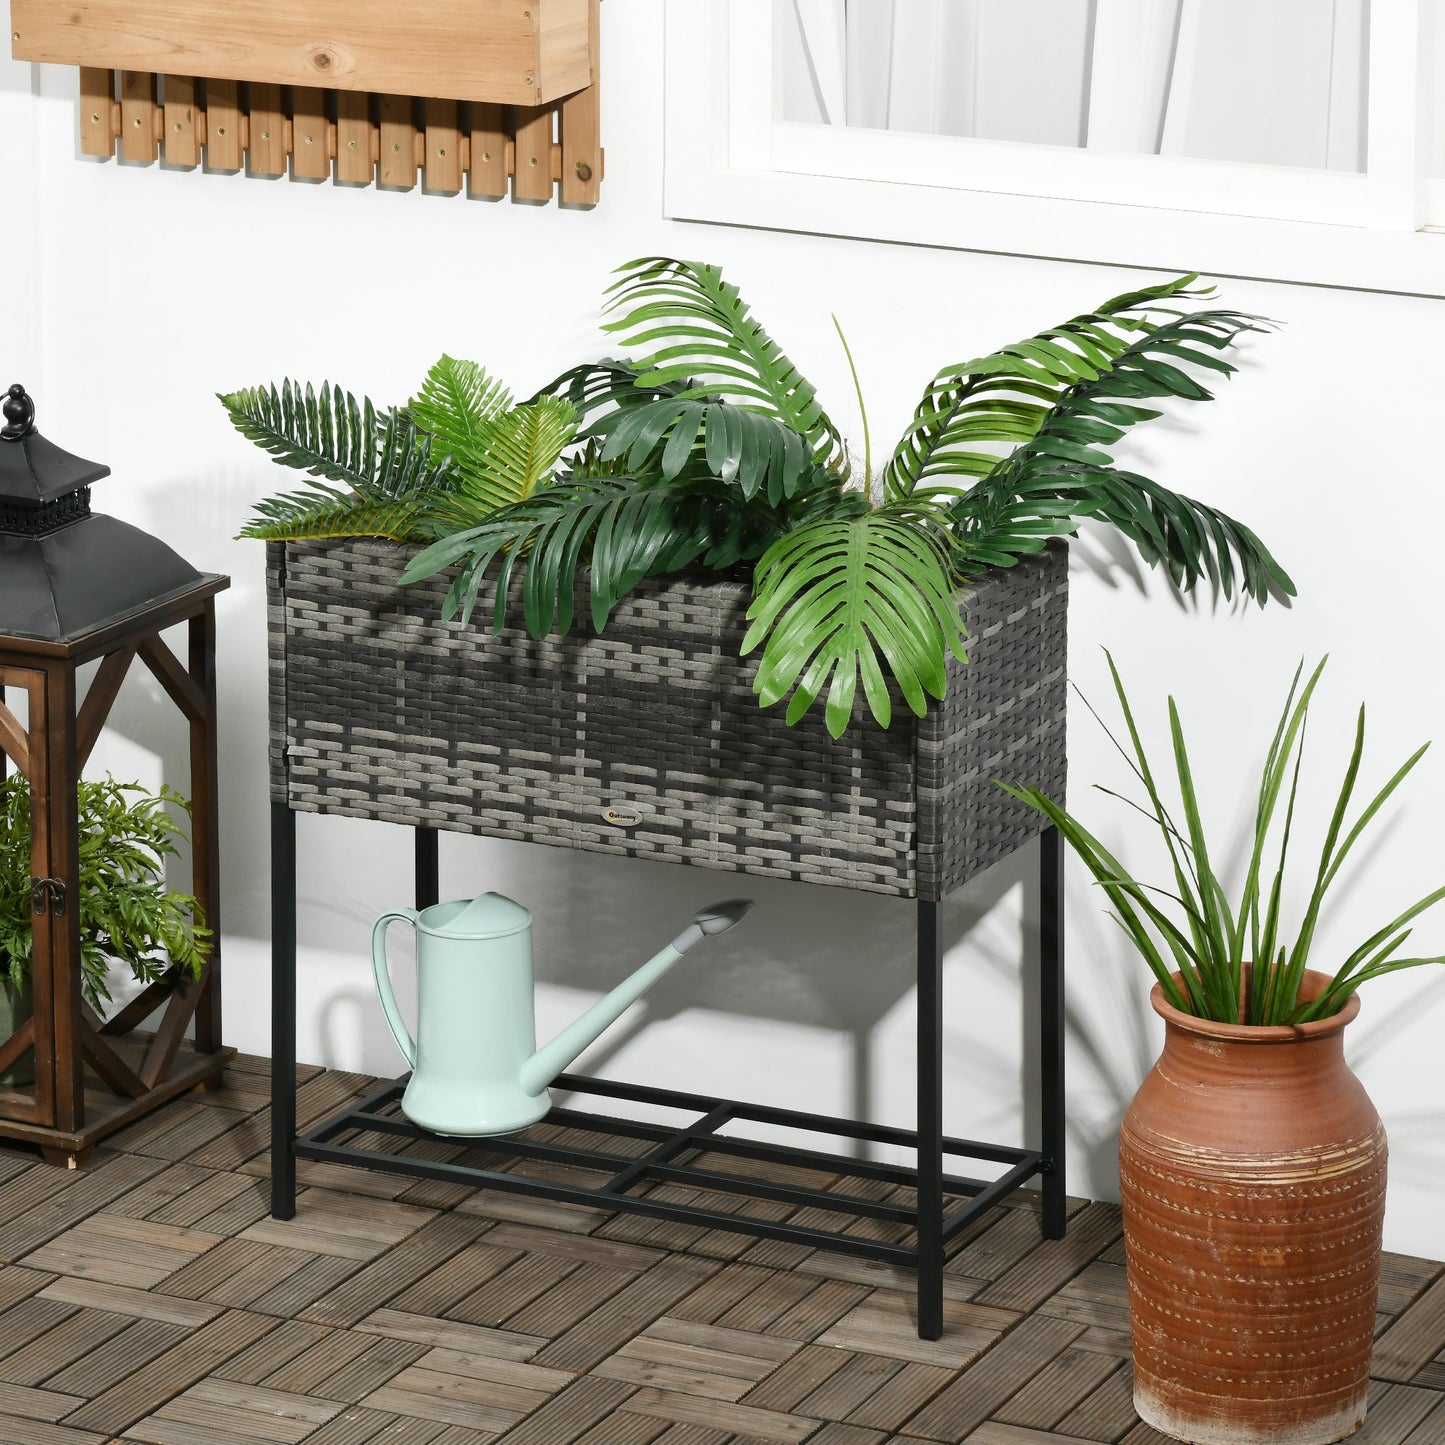 Outdoor and Garden-Raised Garden Bed, Steel Planter Box with legs, Rattan Wicker Look, Tool Storage Shelf, Portable Design for Herbs, Vegetables, Flowers, Gray - Outdoor Style Company